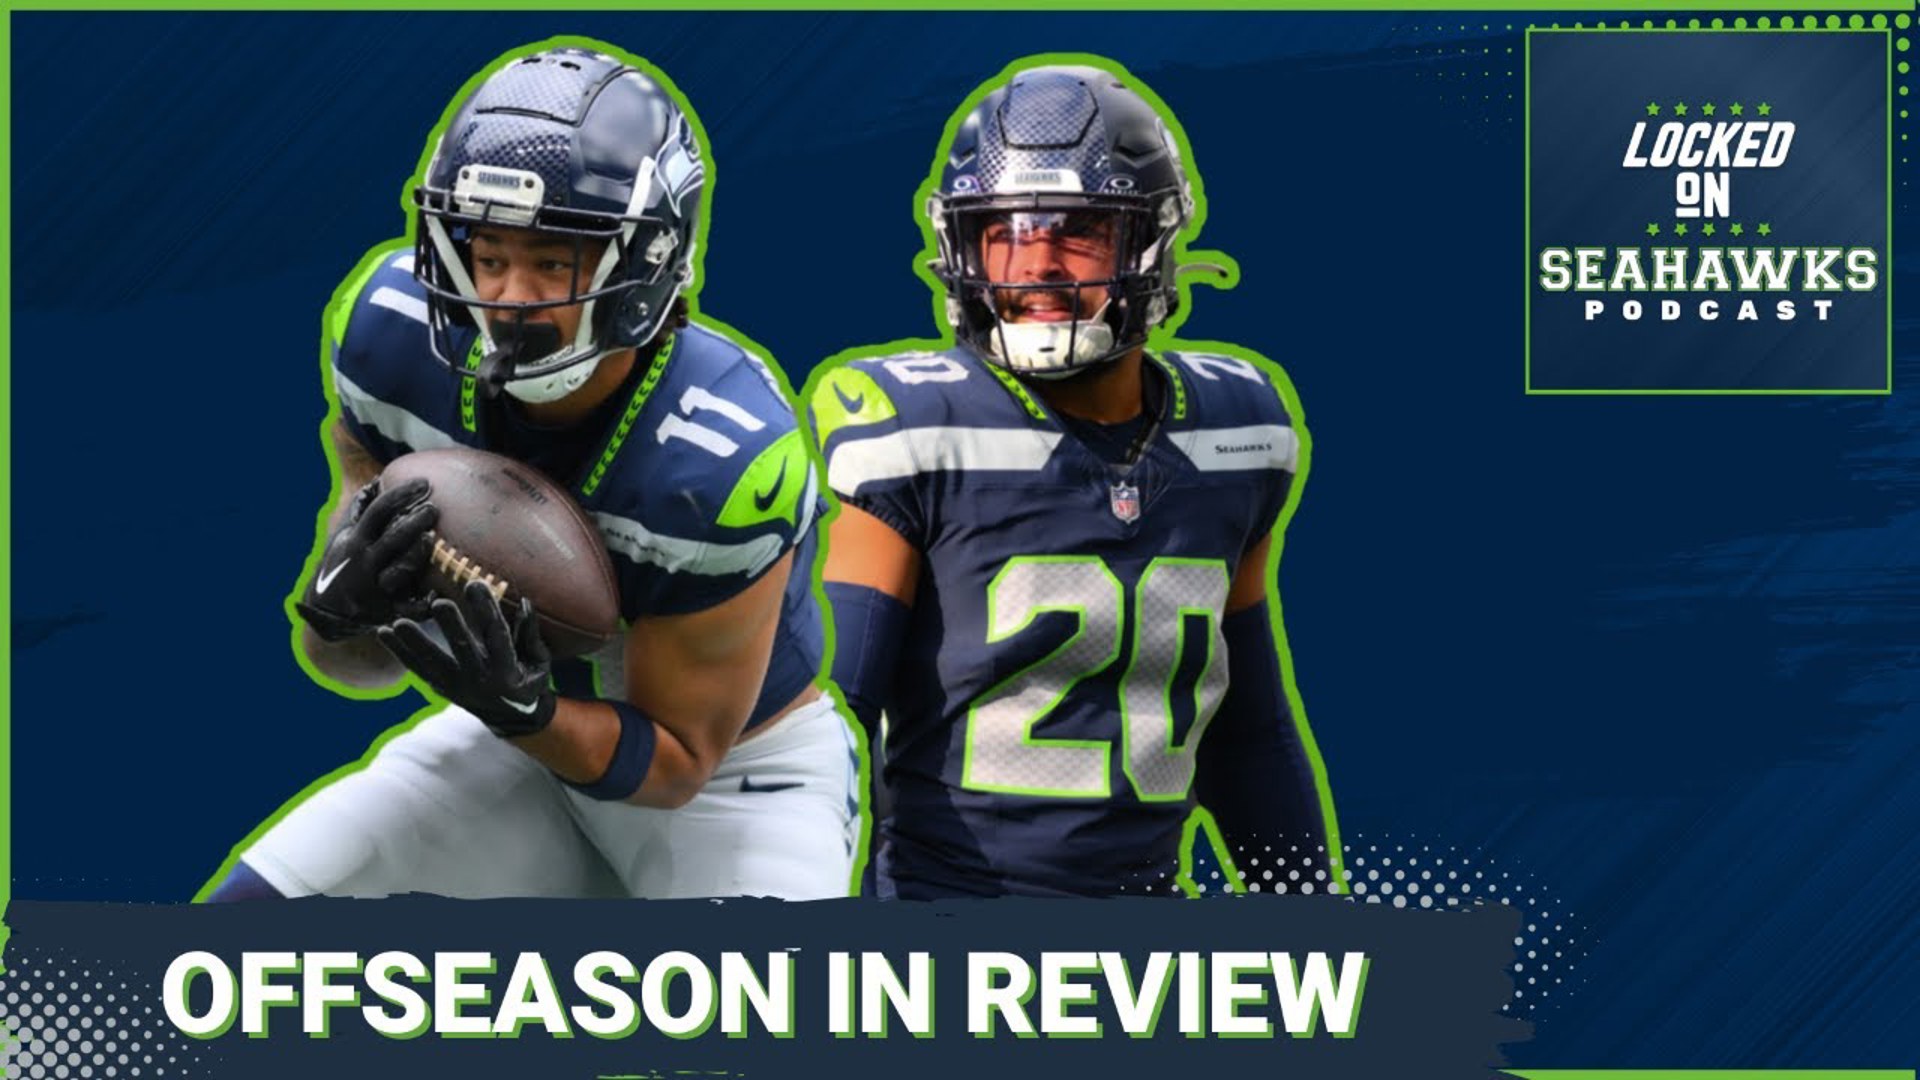 Putting a bow on their first offseason program under coach Mike Macdonald, the Seahawks wrapped up minicamp on Wednesday a day early, and it's full speed ahead